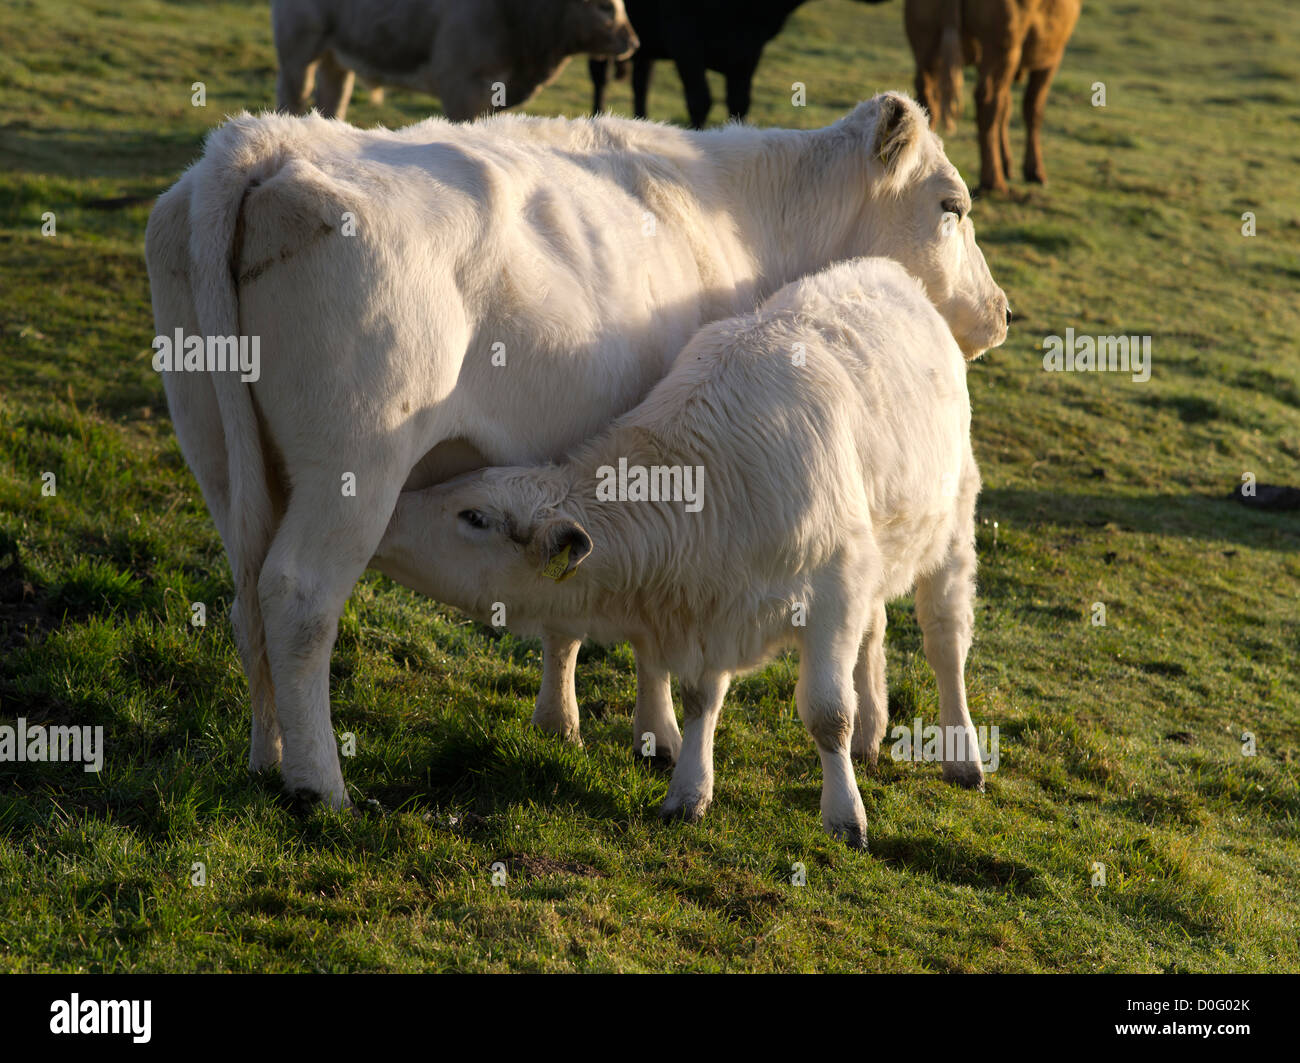 dh Cattle ANIMALS UK White Charolais cross cow feeding young calf cows suckler Stock Photo